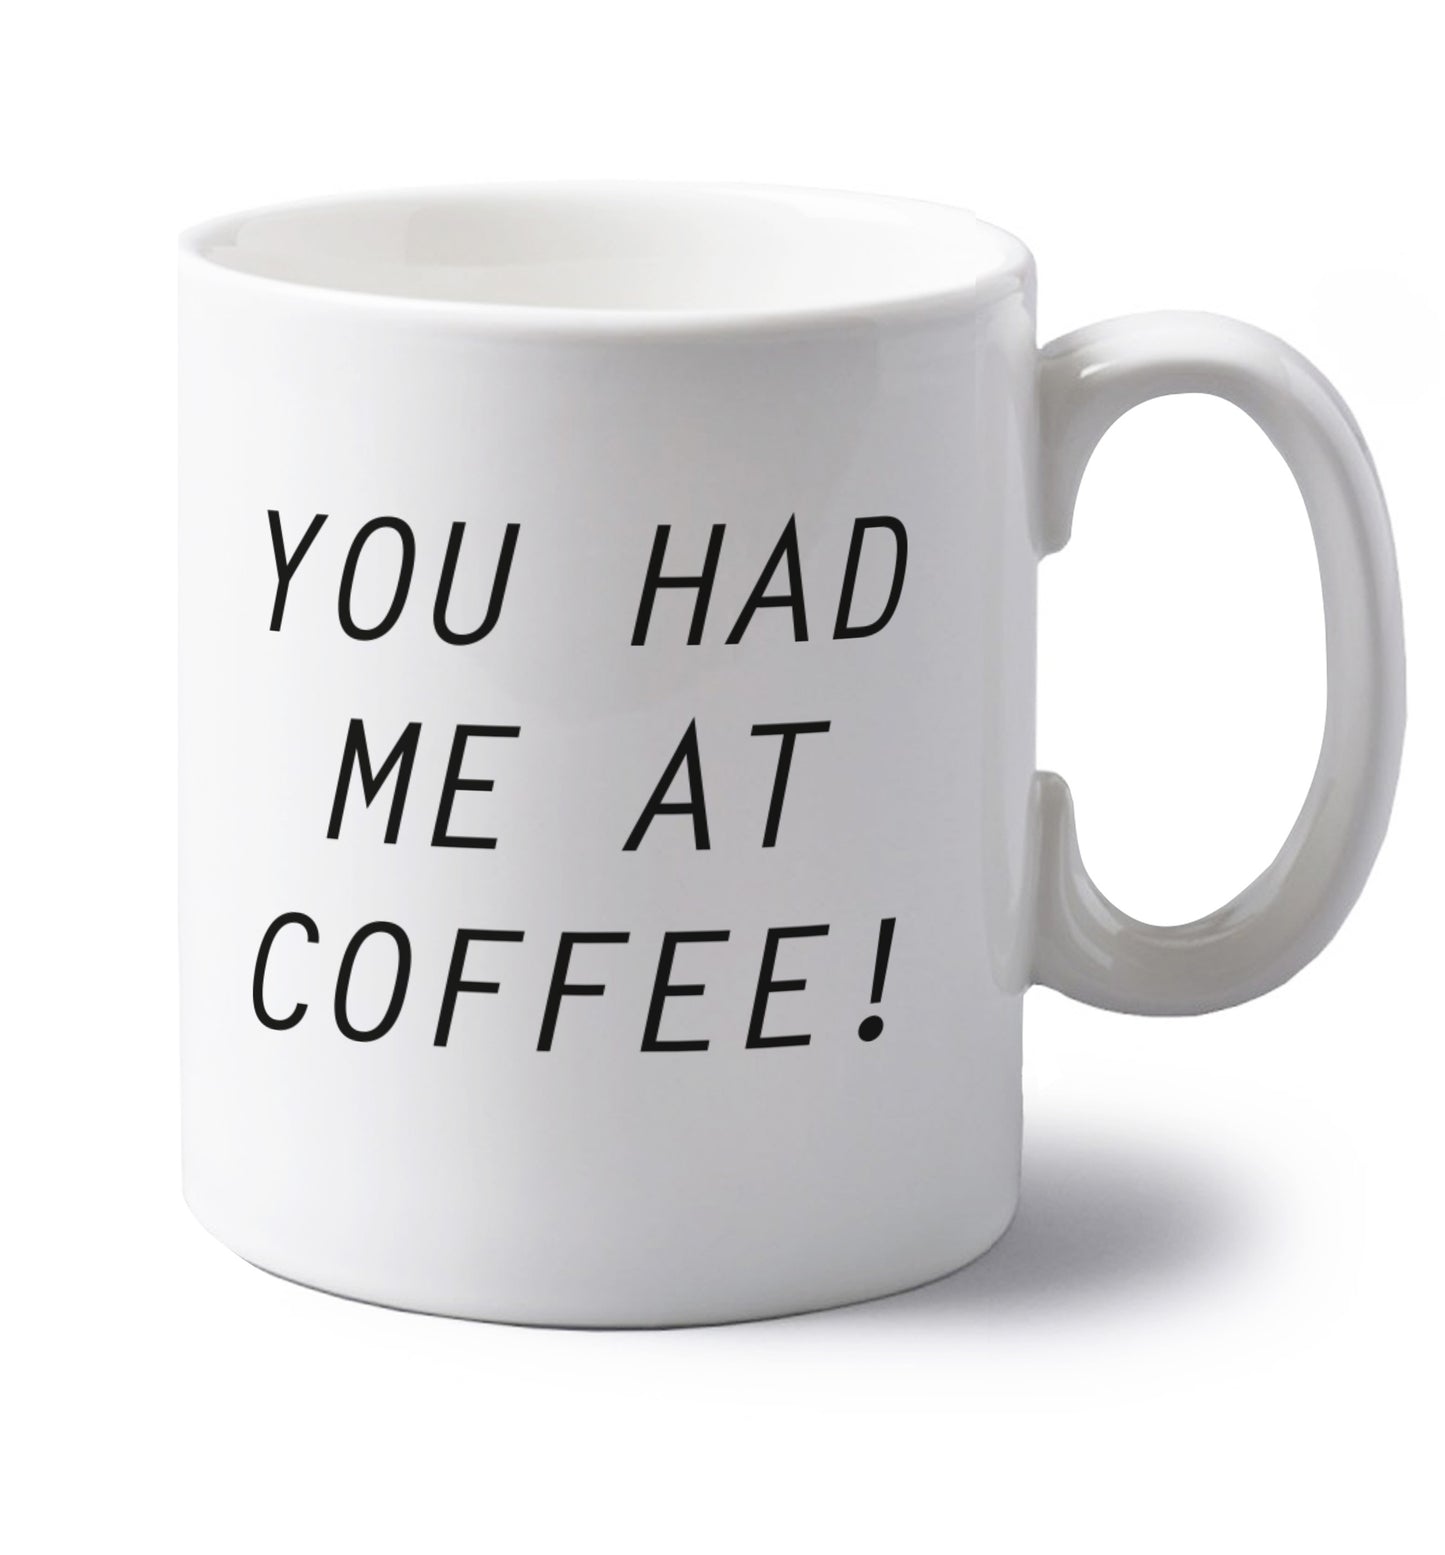 You had me at coffee left handed white ceramic mug 